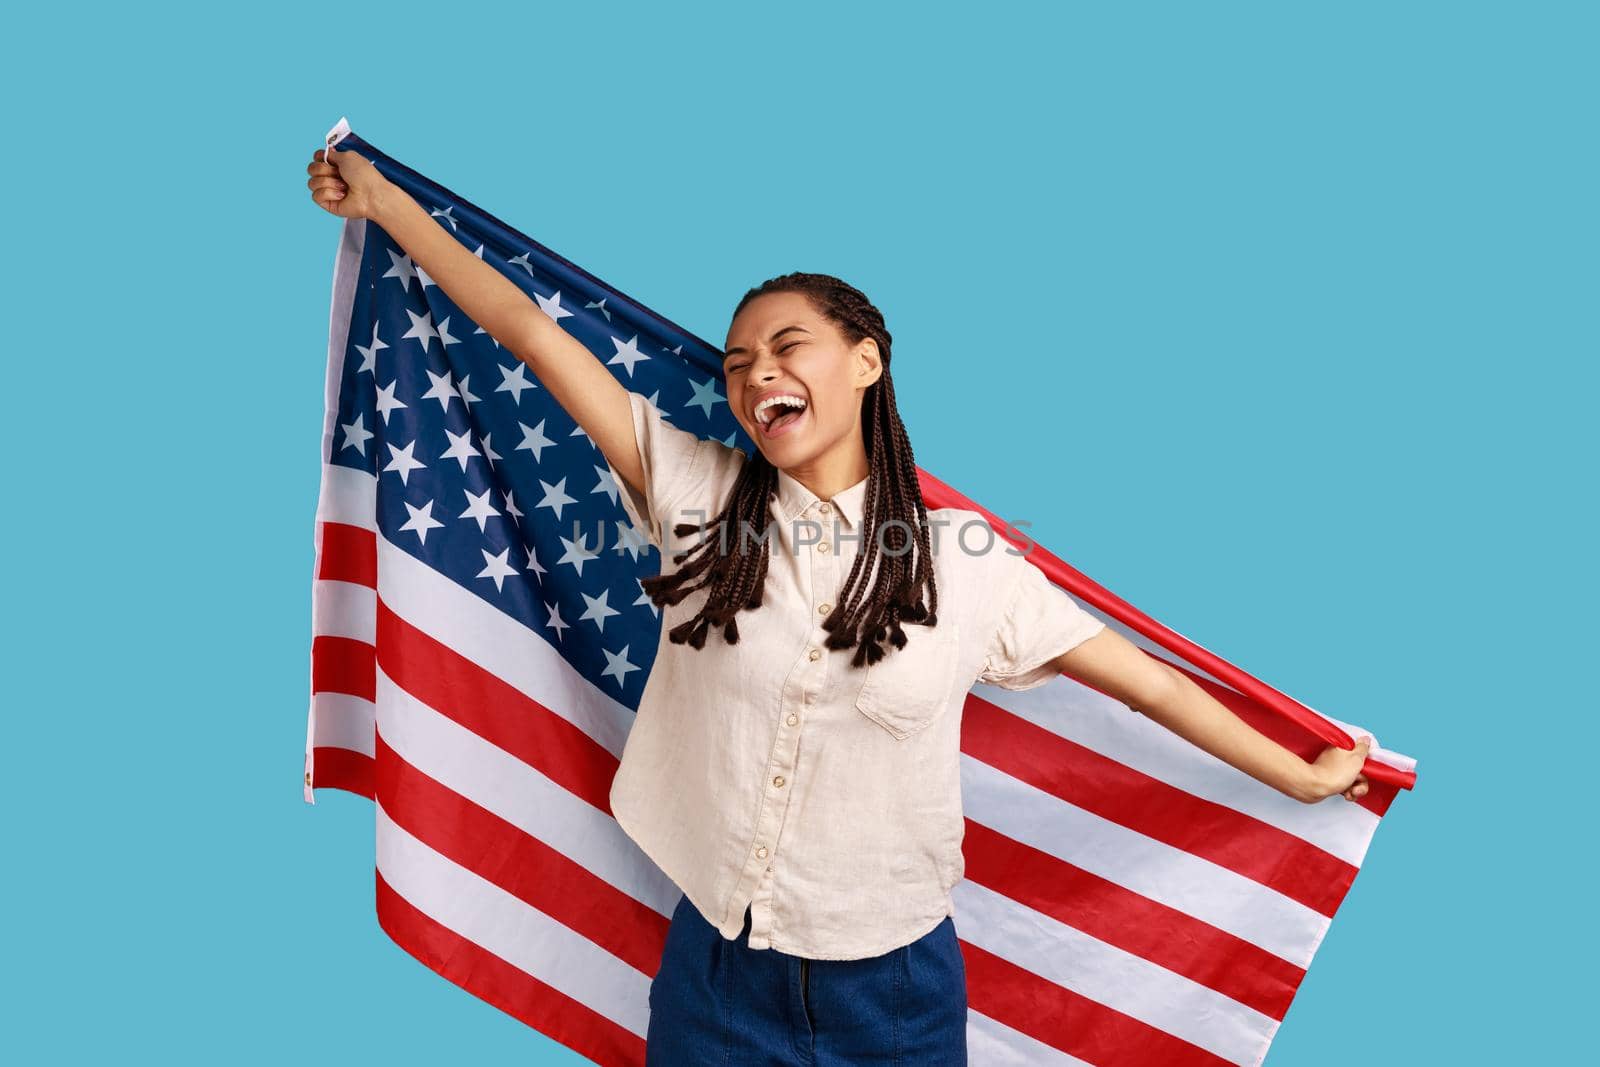 Woman with dreadlocks holding USA flag over shoulders and keeps eyes closed and smiling happily. by Khosro1